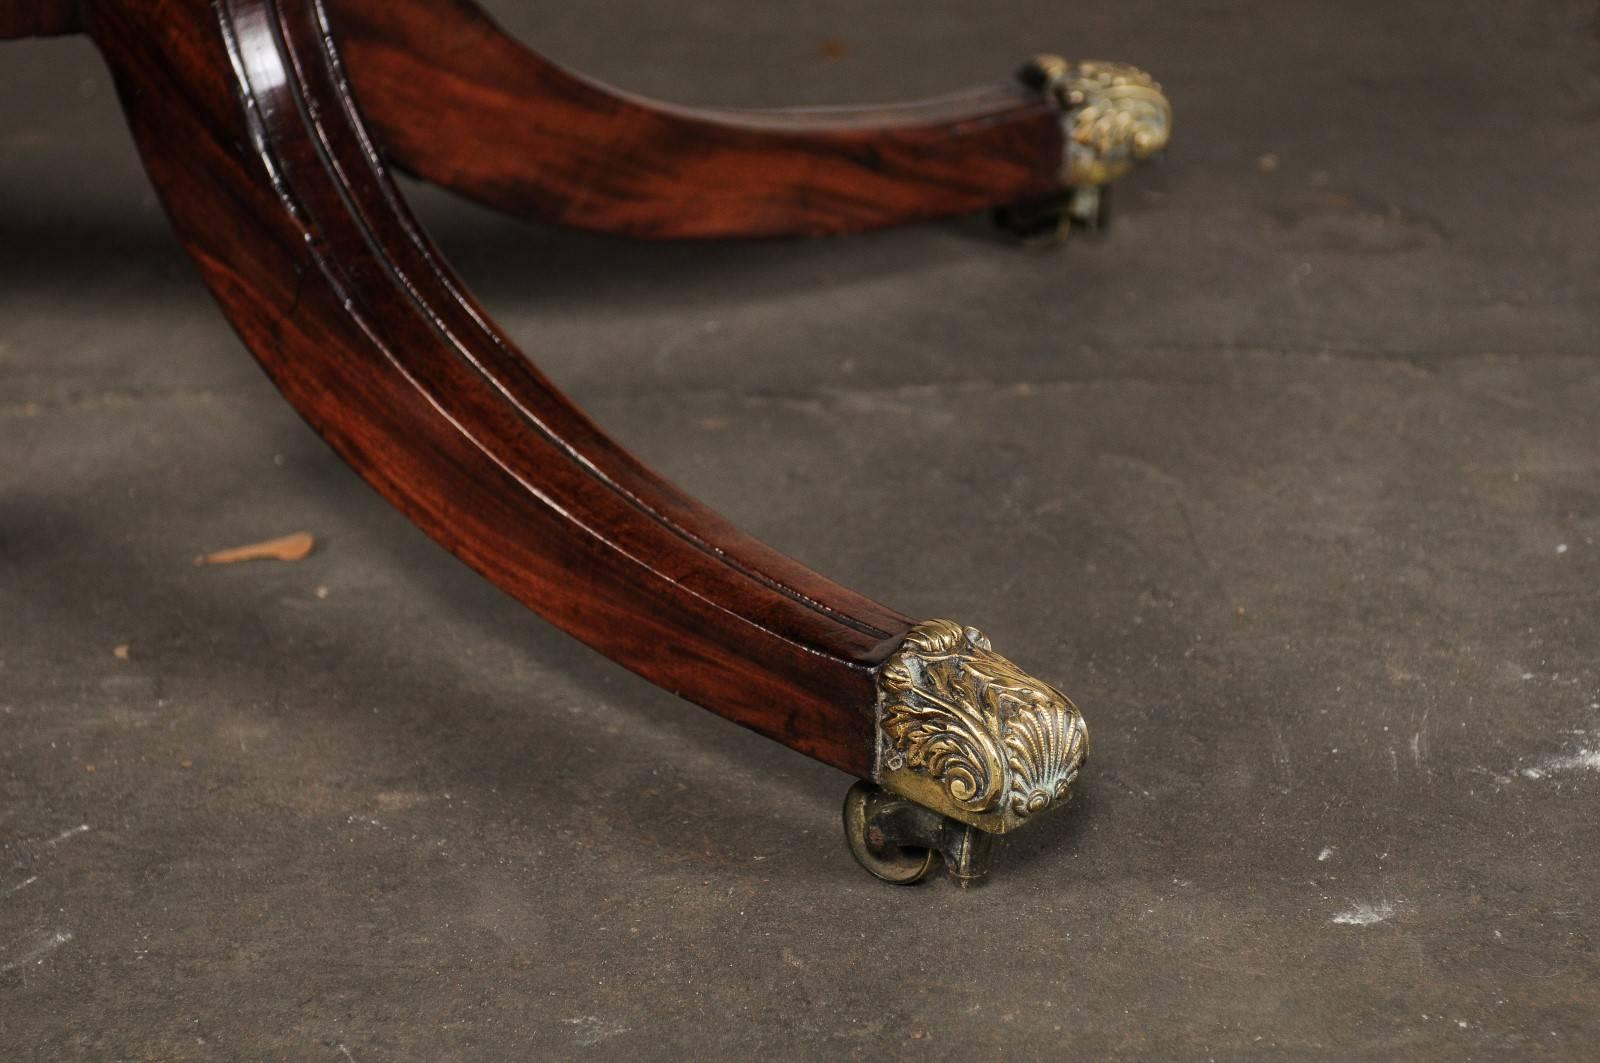 Early 19th Century English Regency Mahogany Breakfast Table with Acanthus Leaf Detail, circa 1820